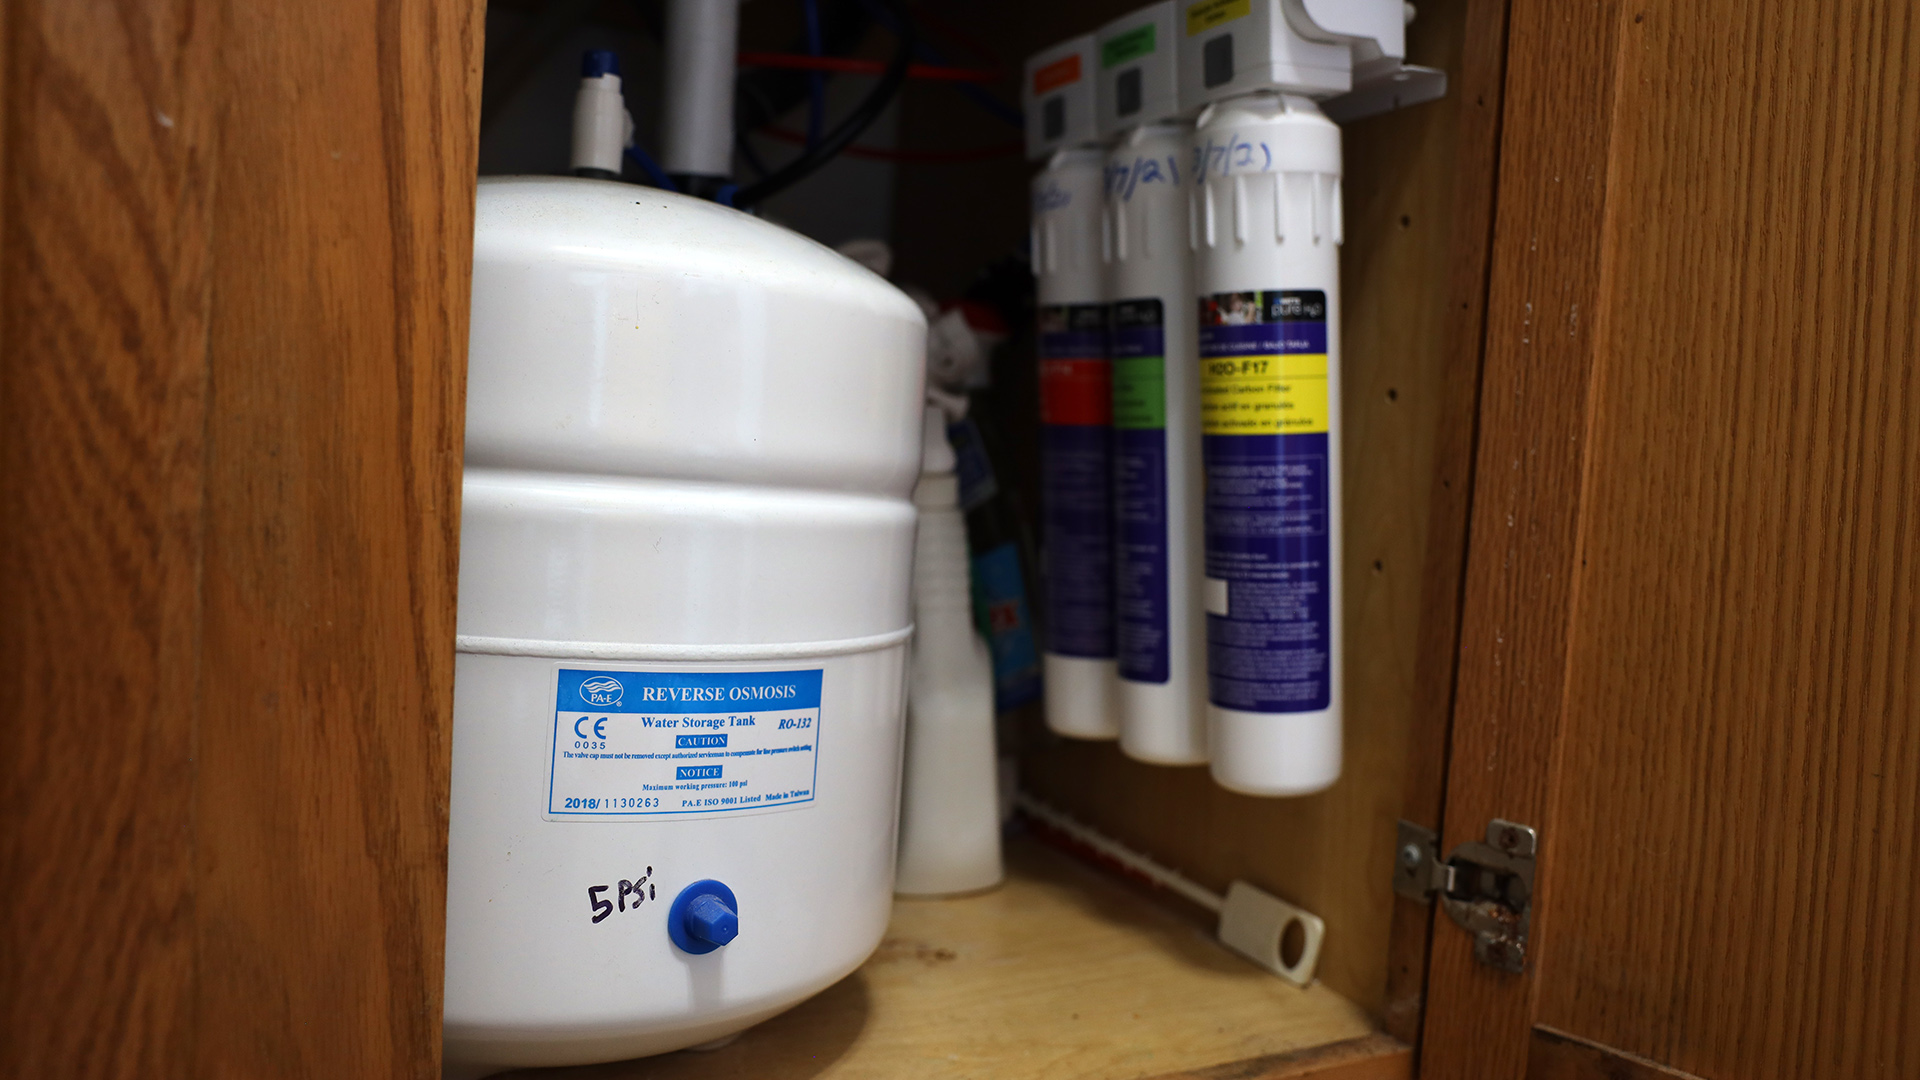 A multi-gallon water container and three adjacent cylinders are installed in a cabinet space under a sink.